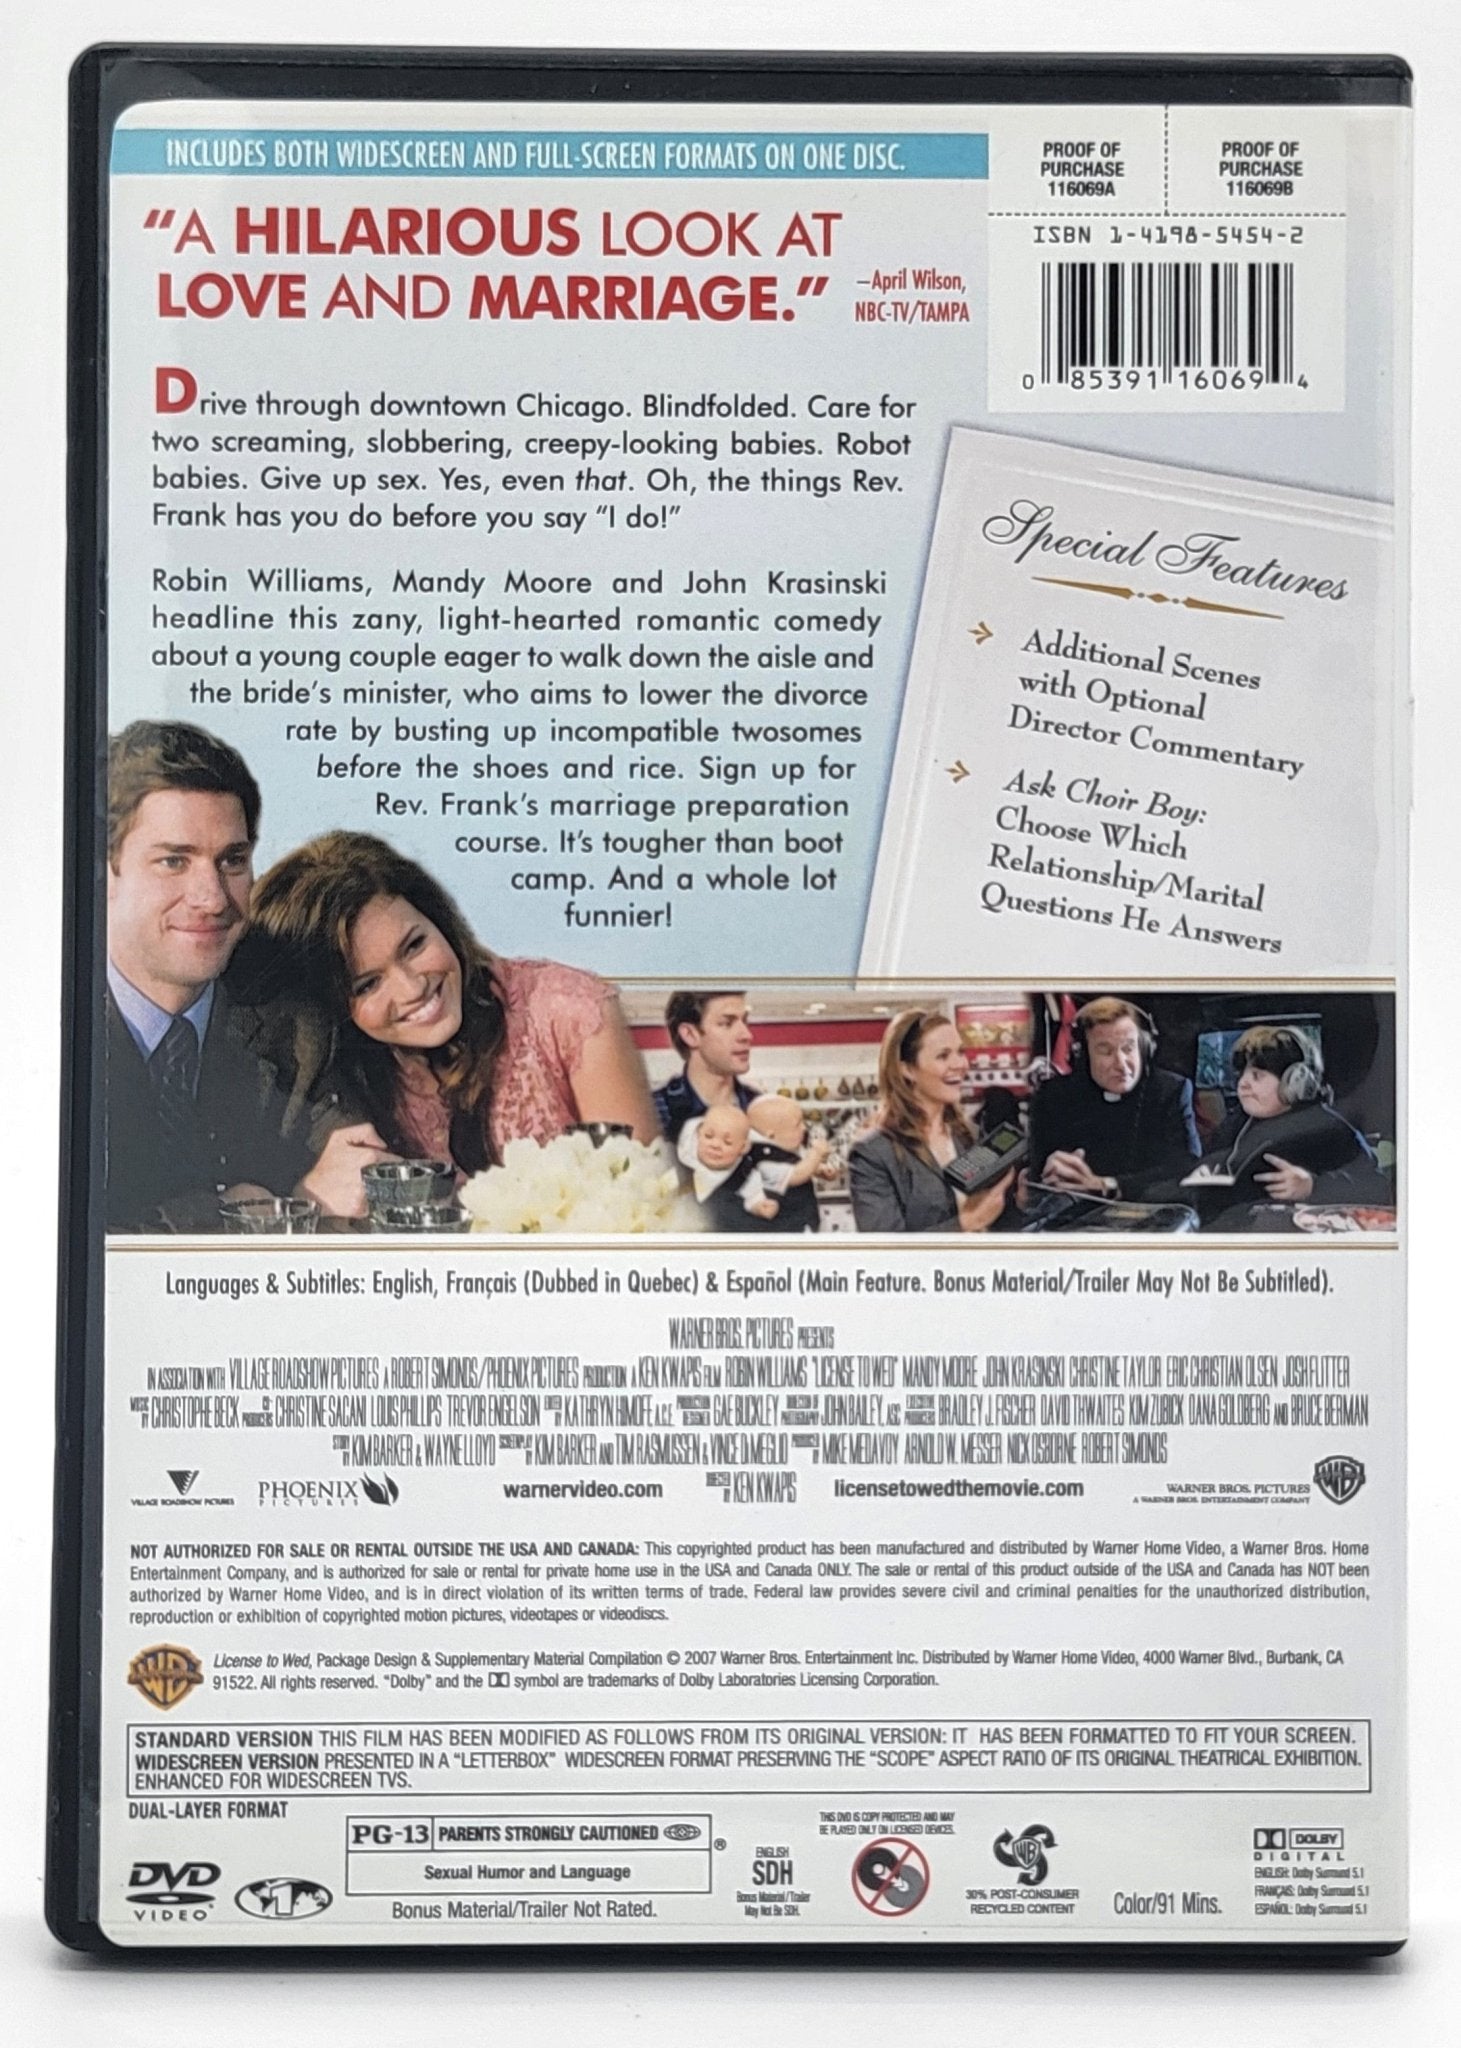 Warner Brother Family Entertainment - License To Wed | DVD | Widescreen - DVD - Steady Bunny Shop